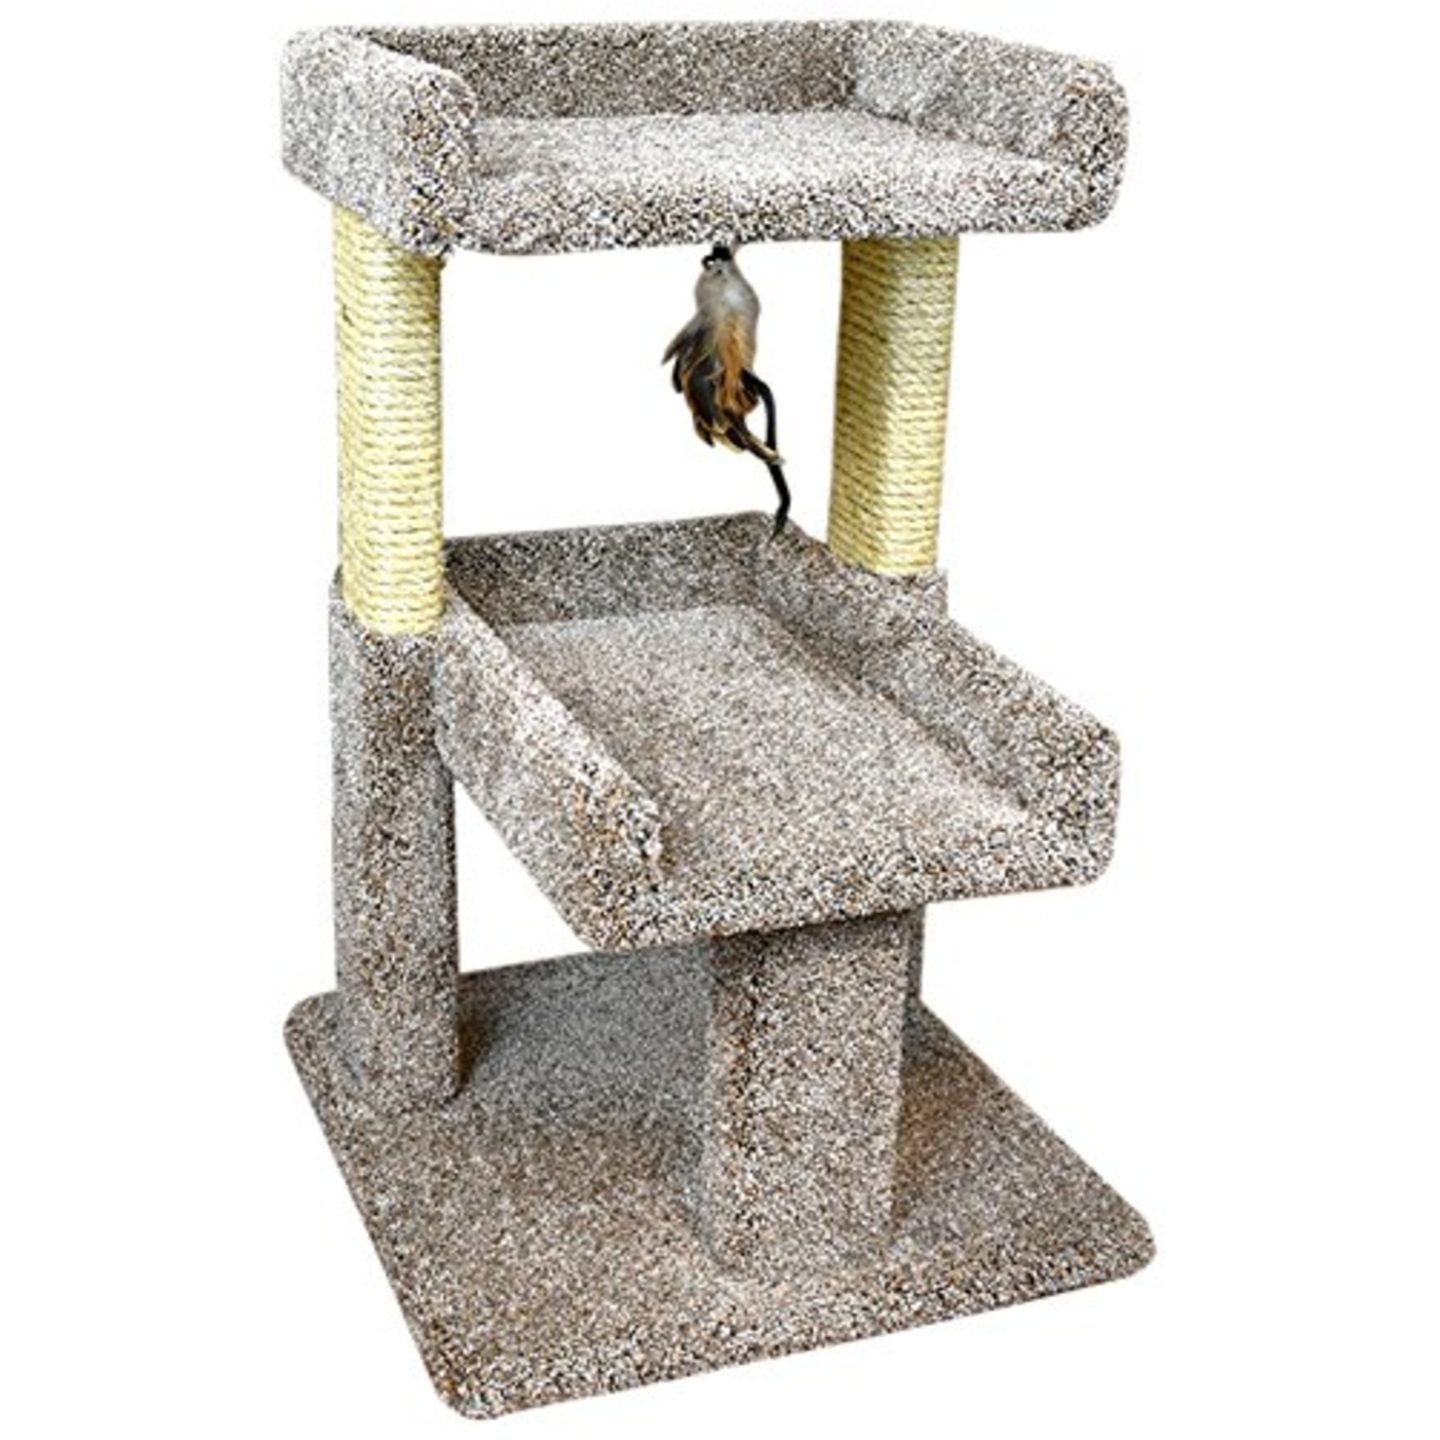 A solid wood, cheap and affordable cat tree for large cats that is made in the USA.